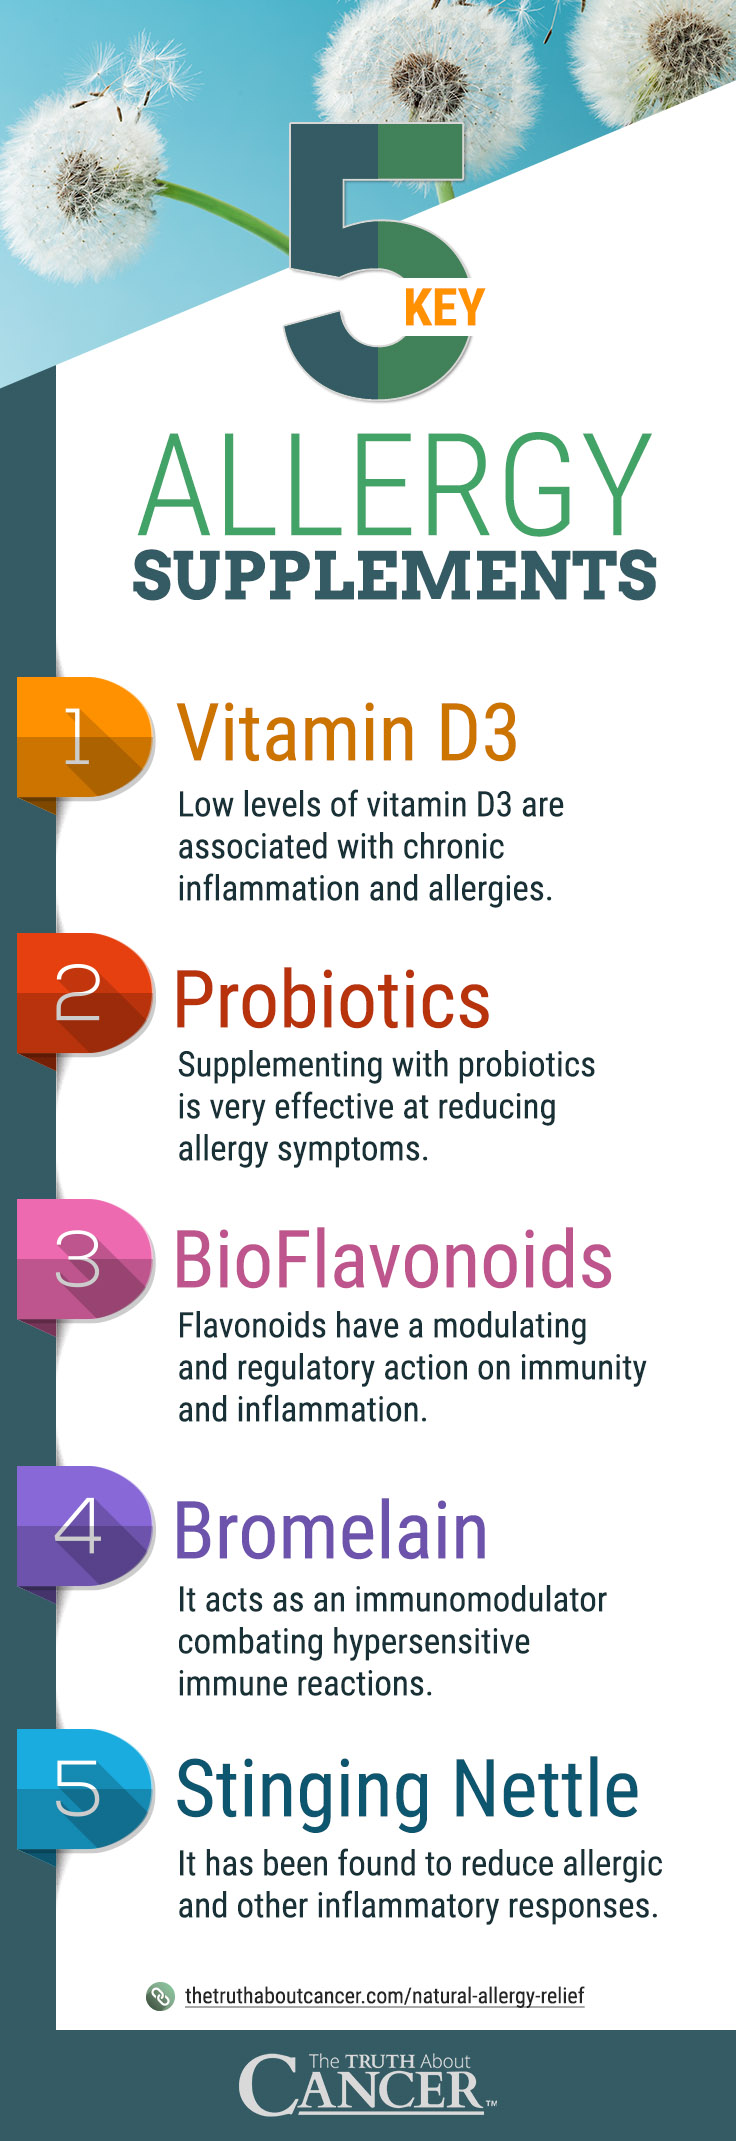 Here are 5 Key Allergy Supplements: Vitamin D3, Probiotics, BioFlavonoids, Bromelain, and Stinging Nettle. 